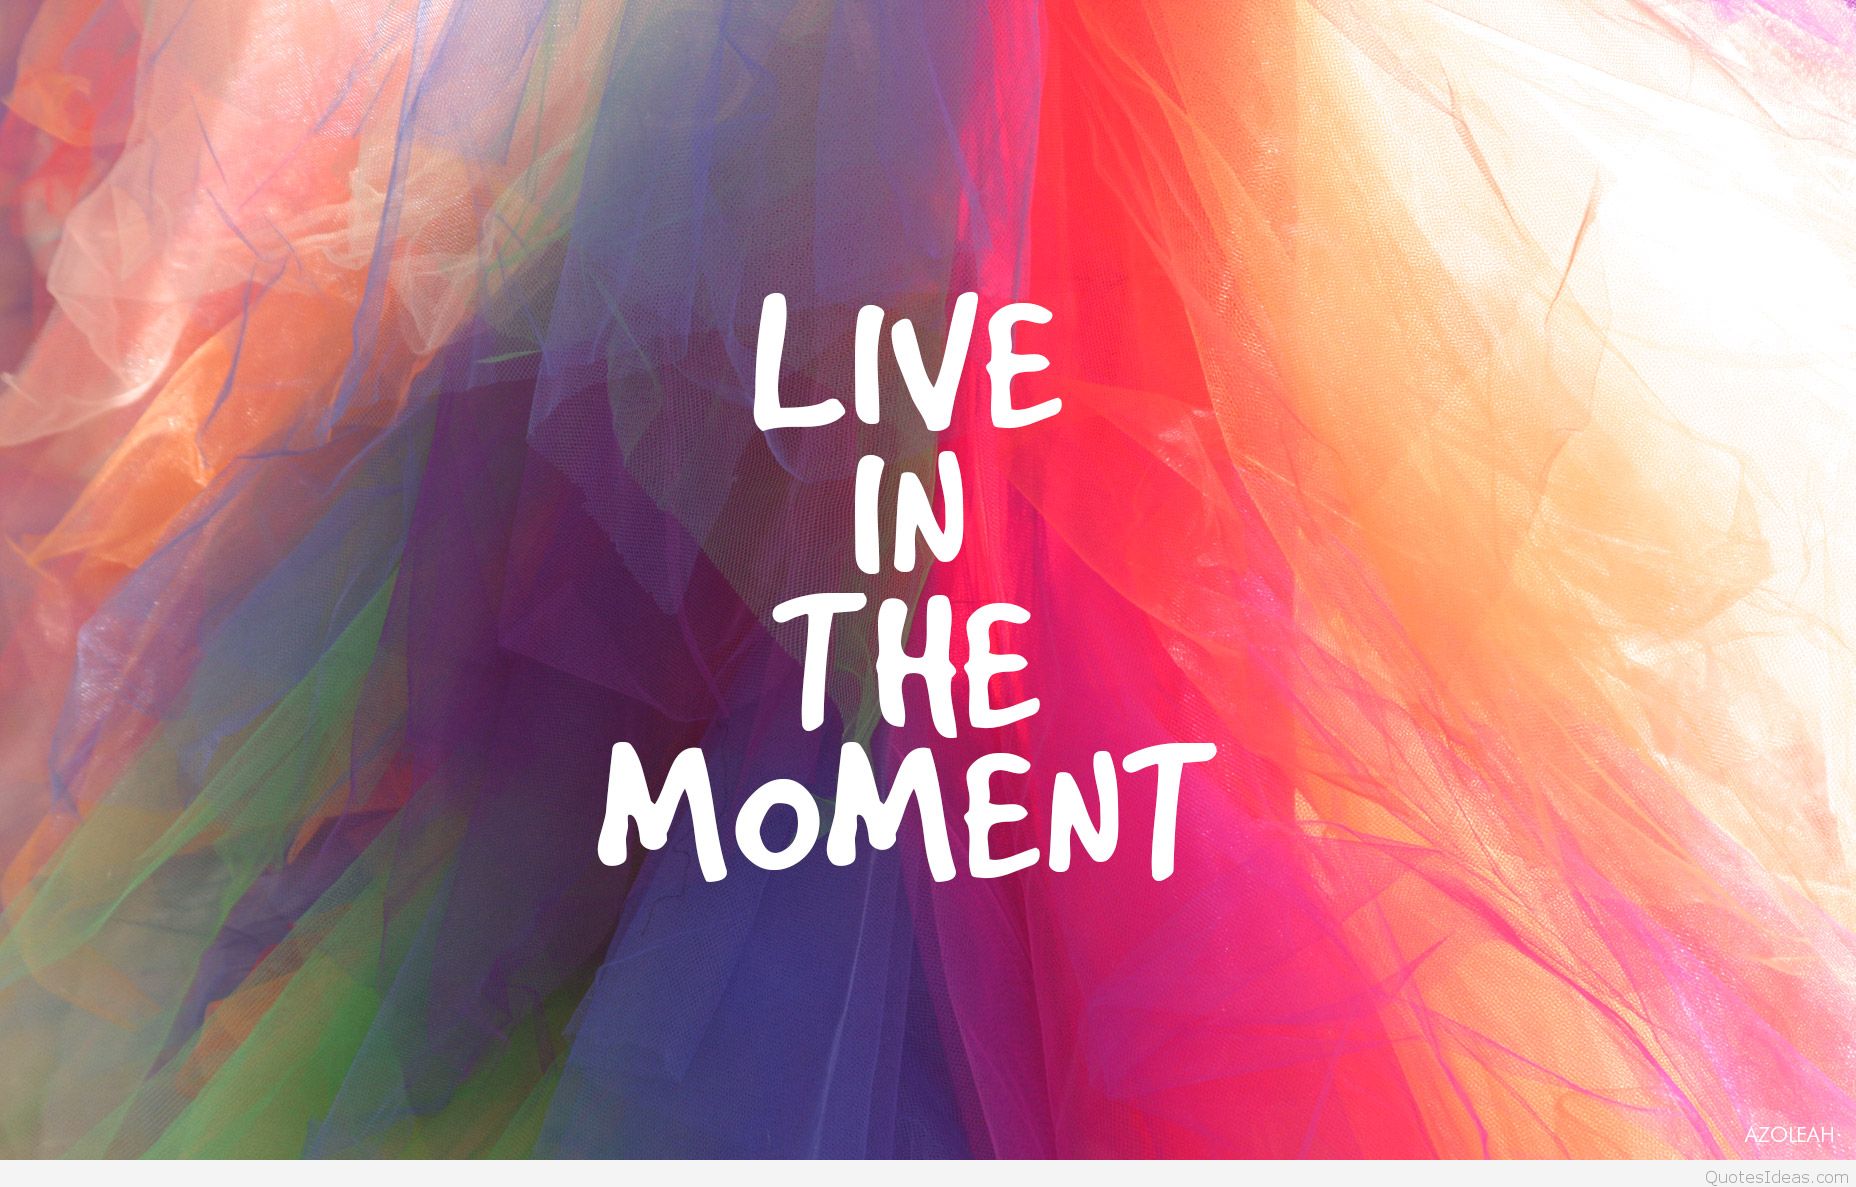 Once be happy. Красивое изображение moments. Life moments картинки. Live in the moment. Live at the moment.